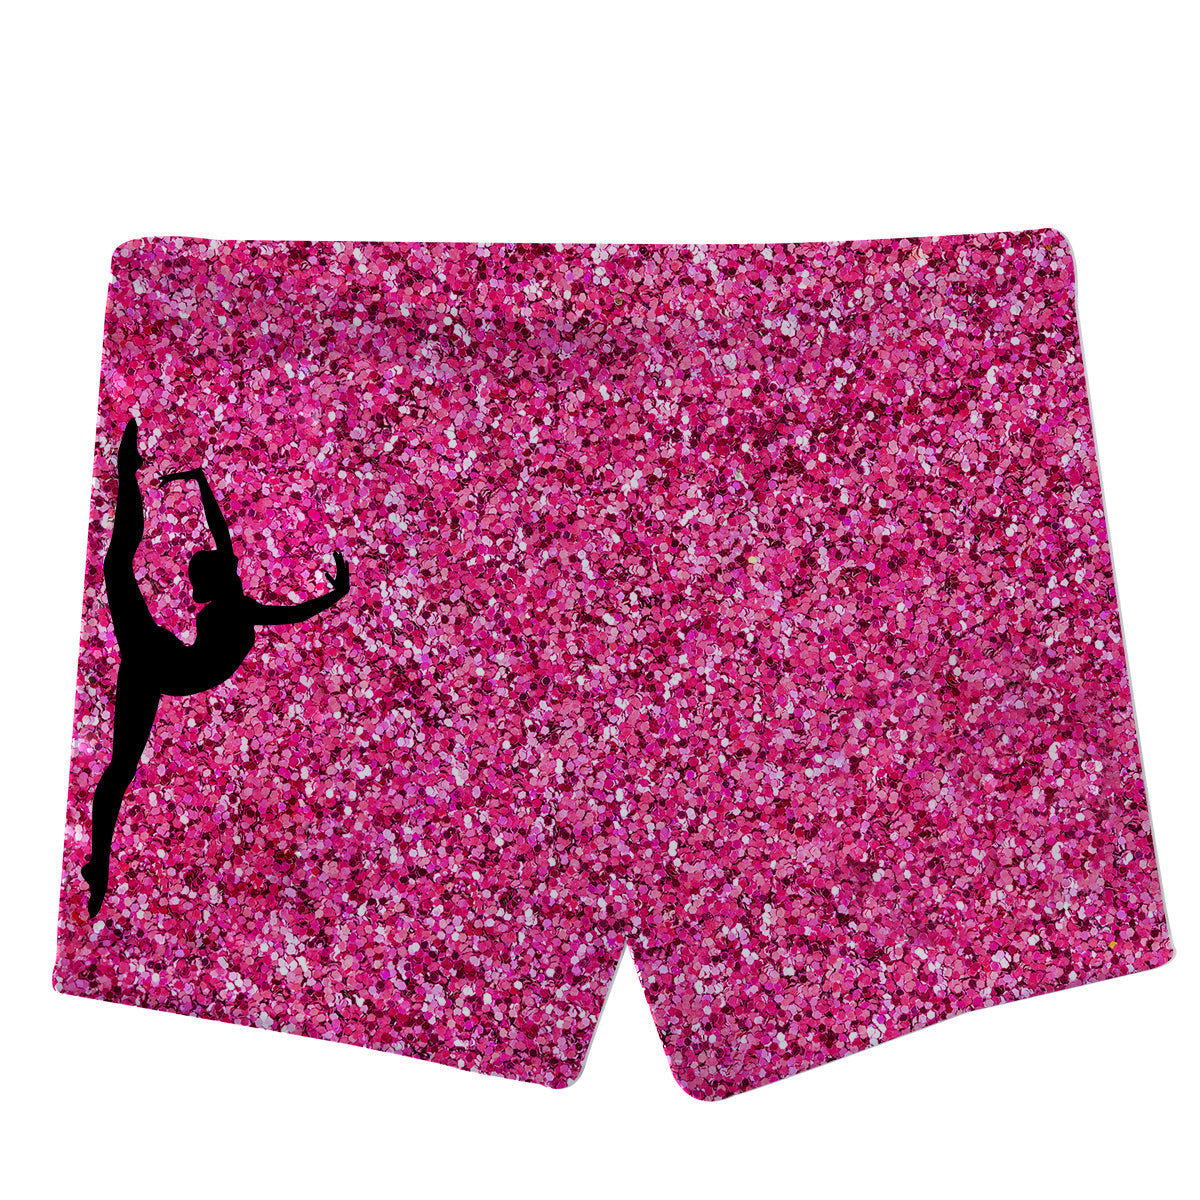 Hot pink glitter and Black dance shorts with monogram - Wimziy&Co.